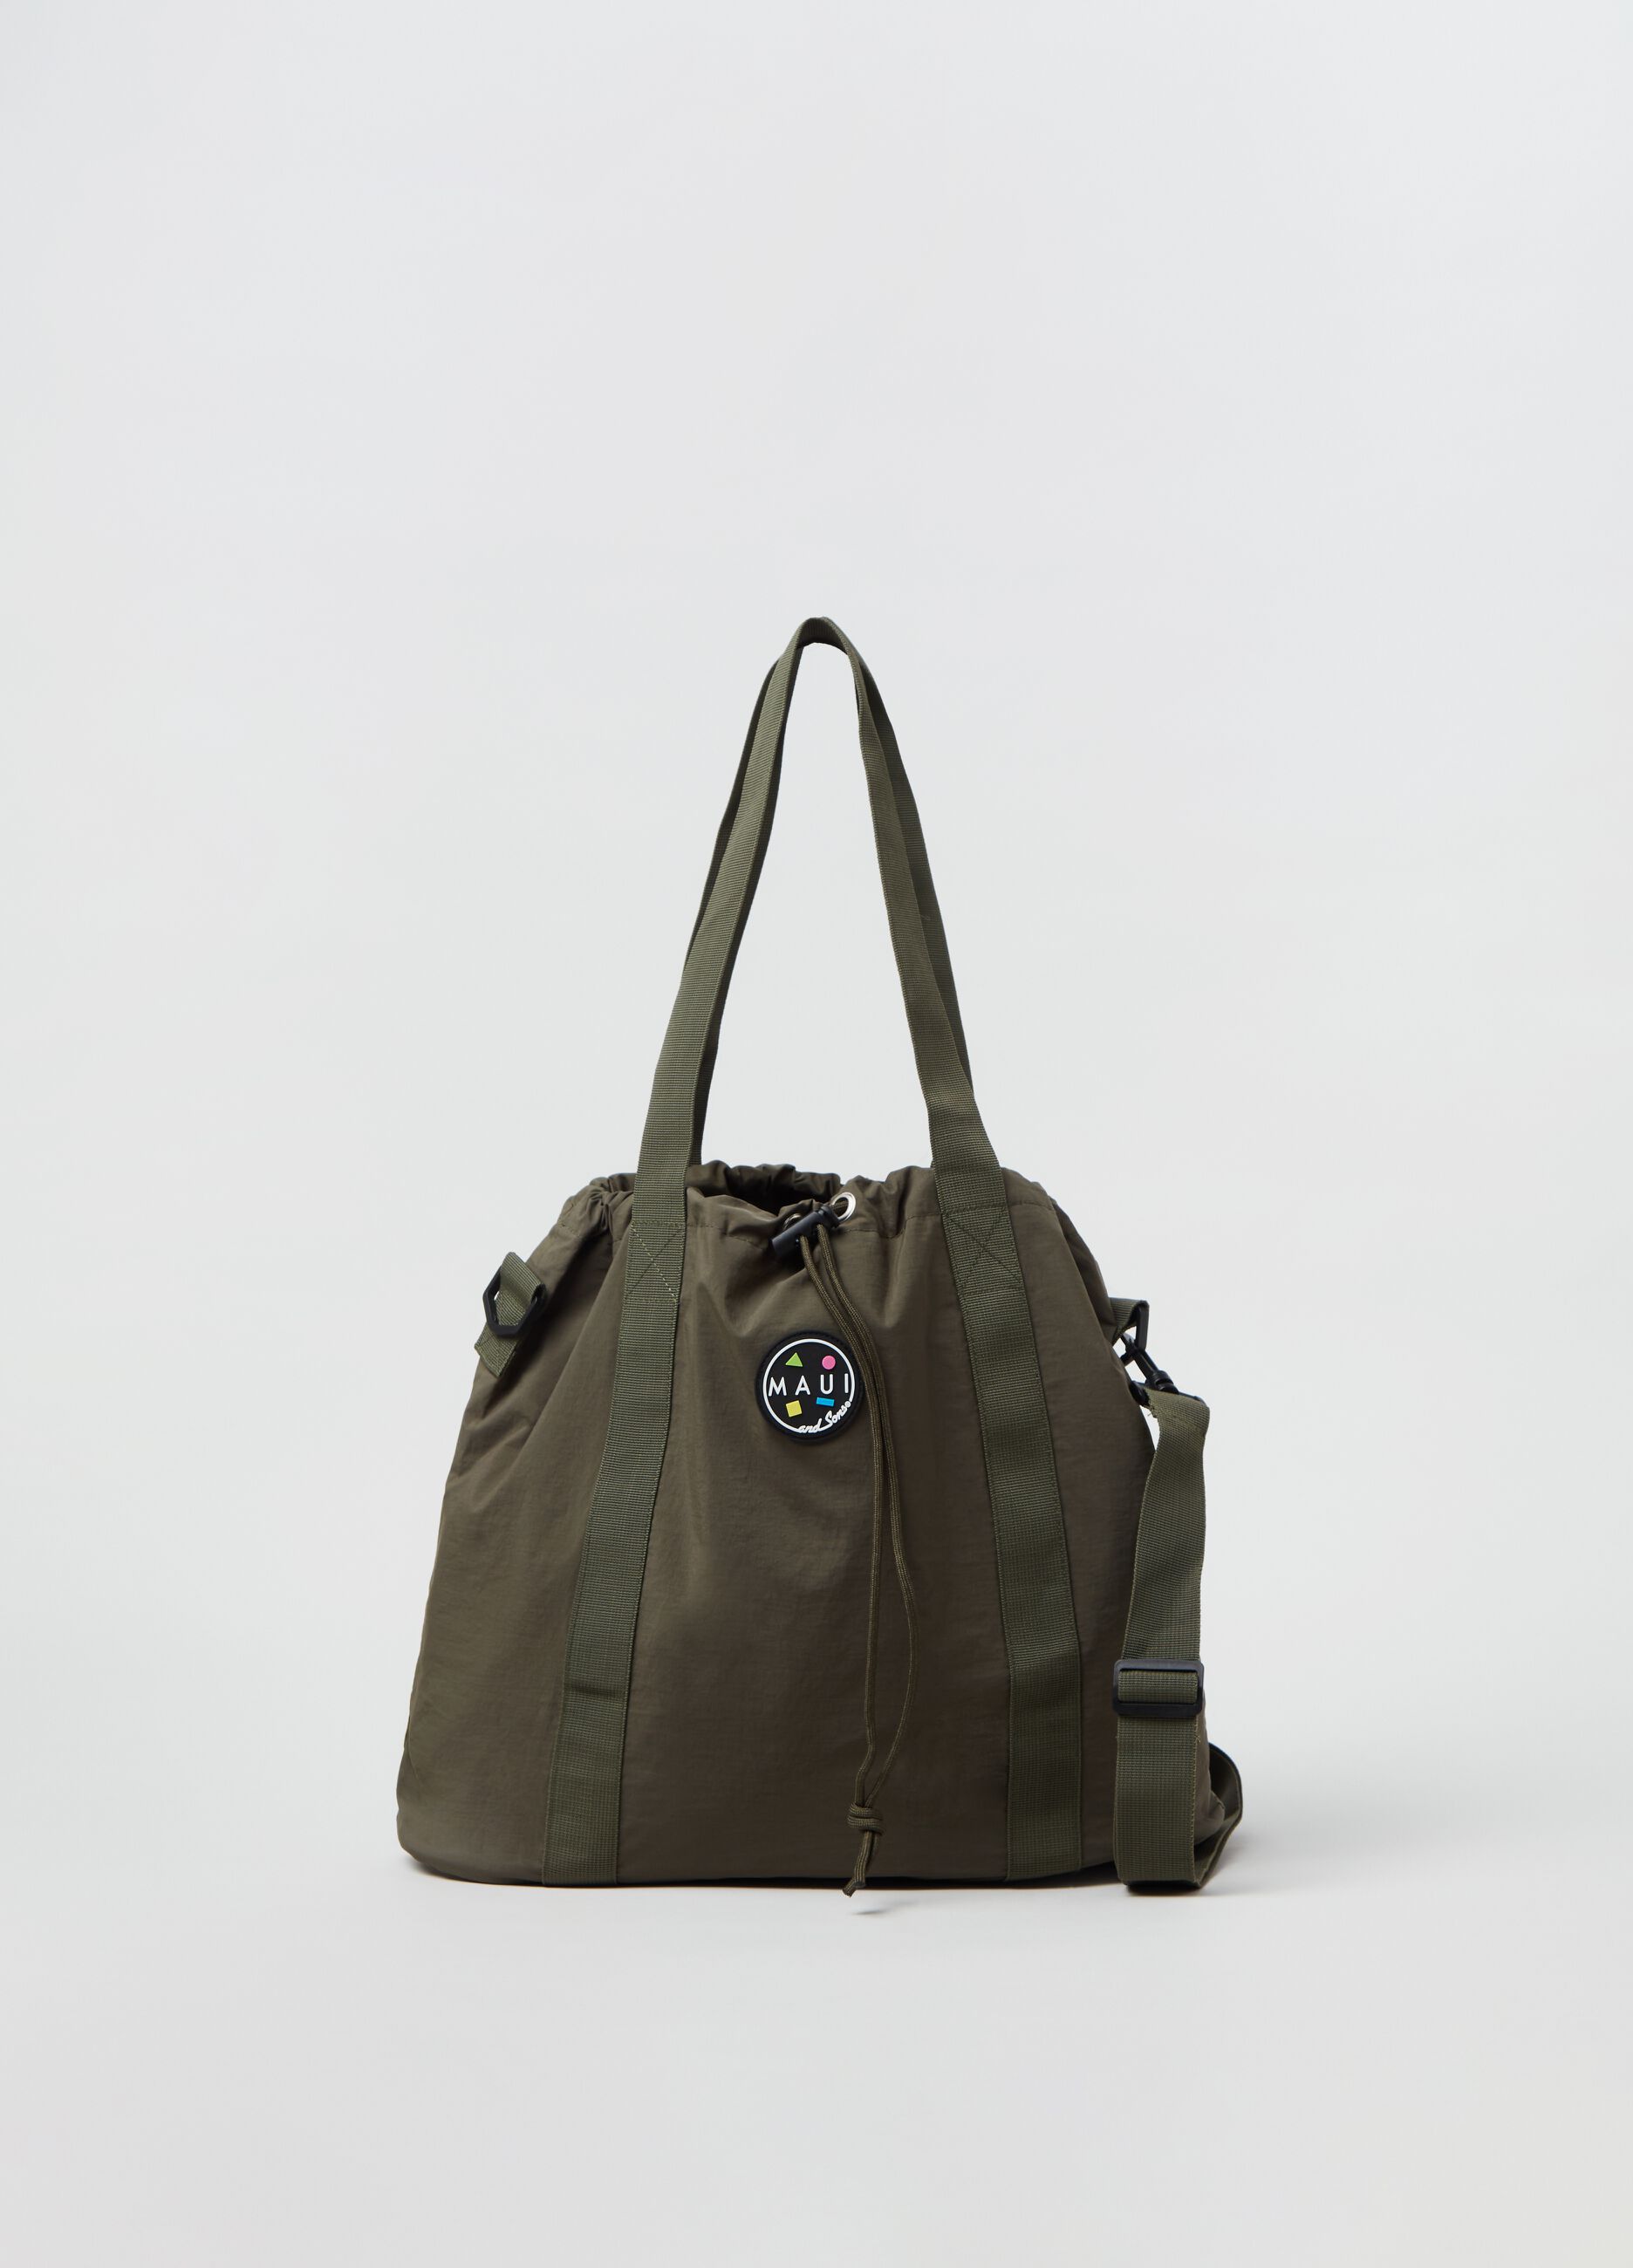 Beach bag by Maui and Sons